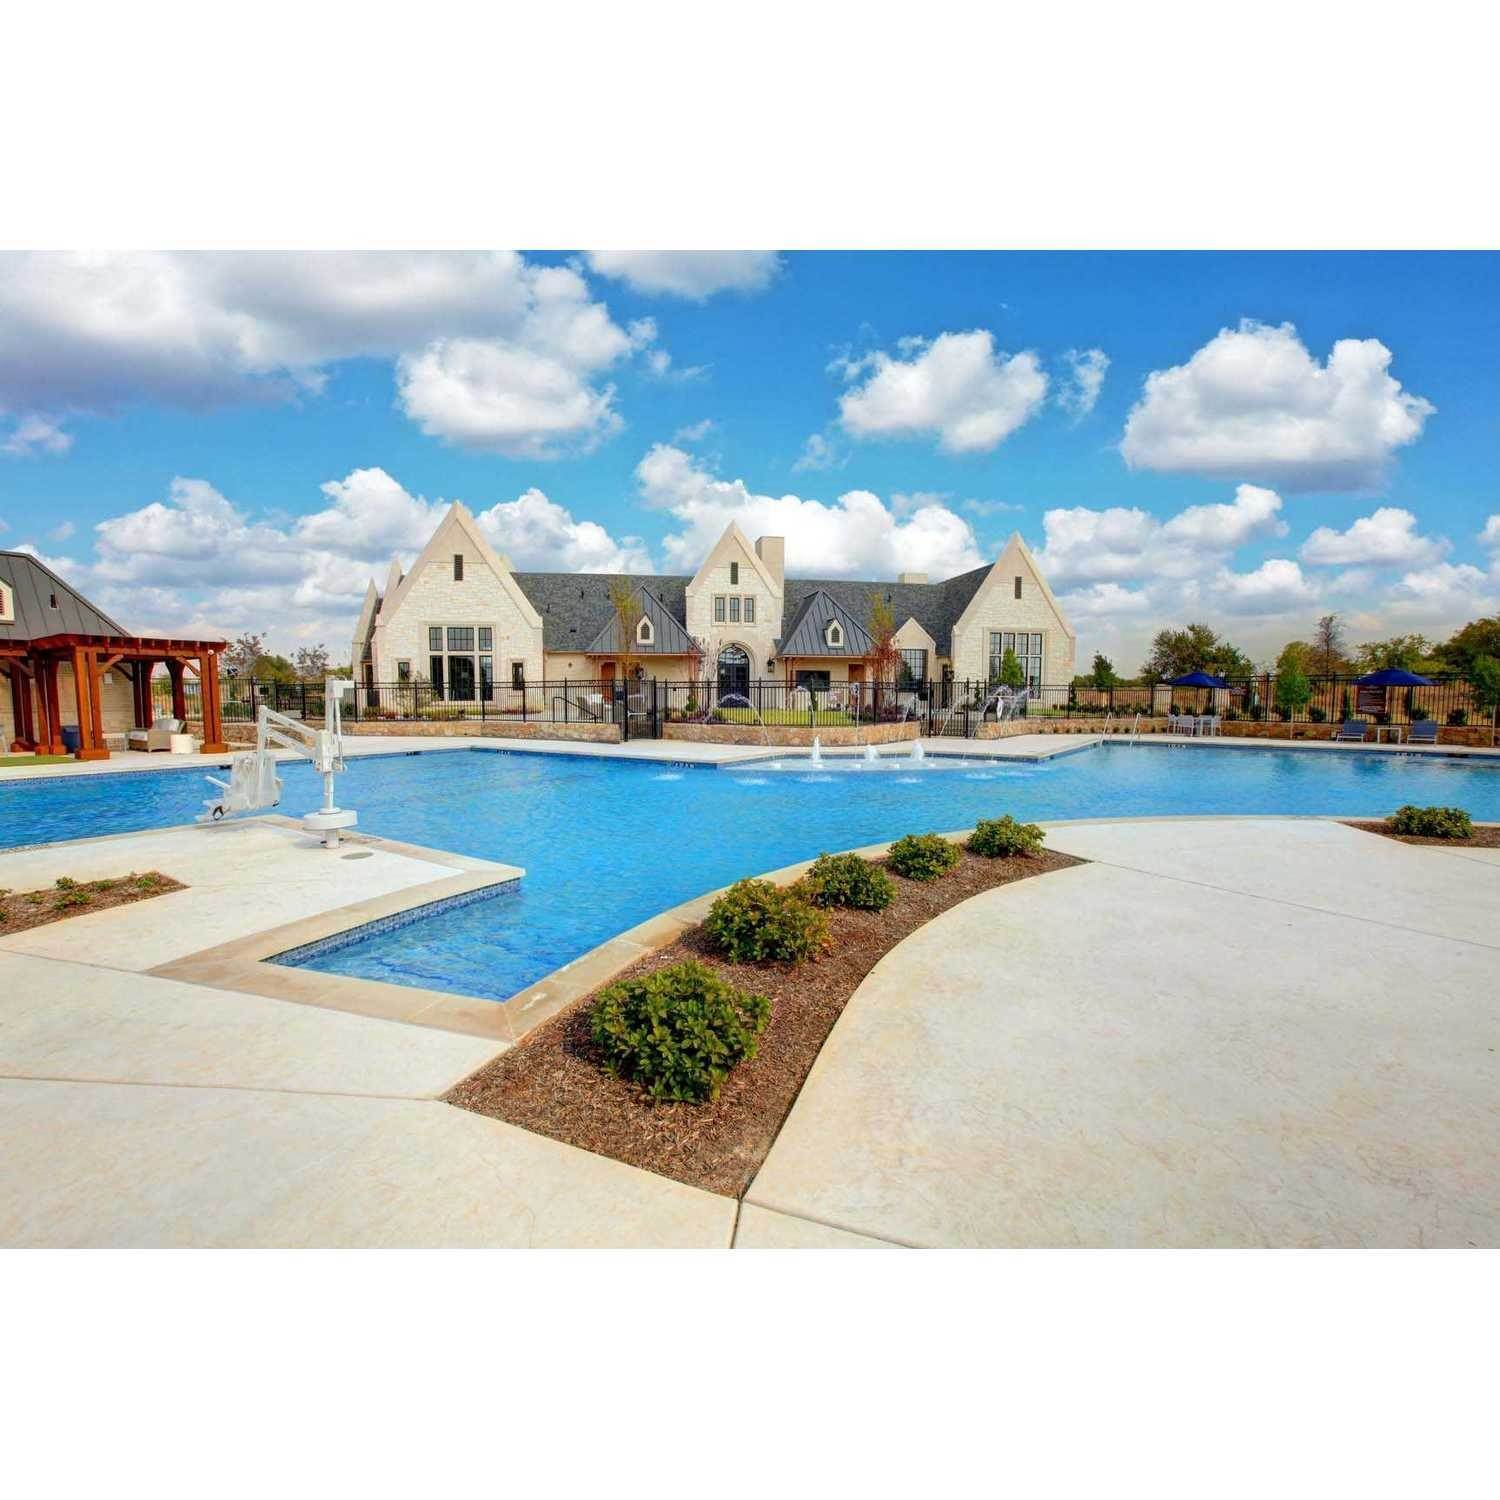 13. Cambridge Crossing 40ft. lots xây dựng tại 2237 Pinner Court, Frisco, TX 75035